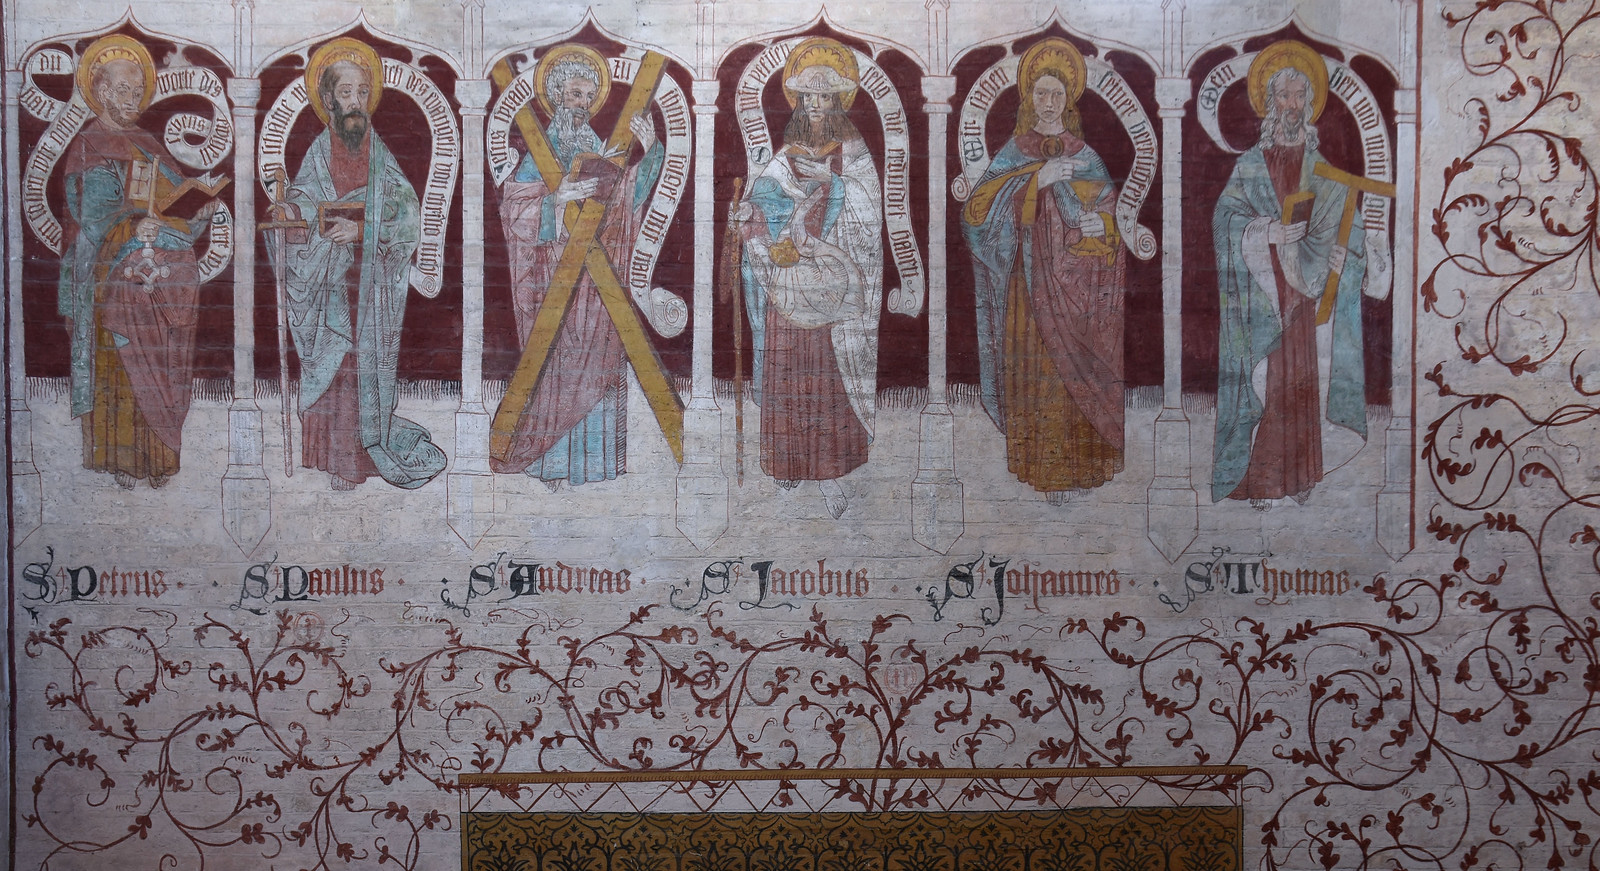 Wall paintings in churches and cathedral’s | Flickr